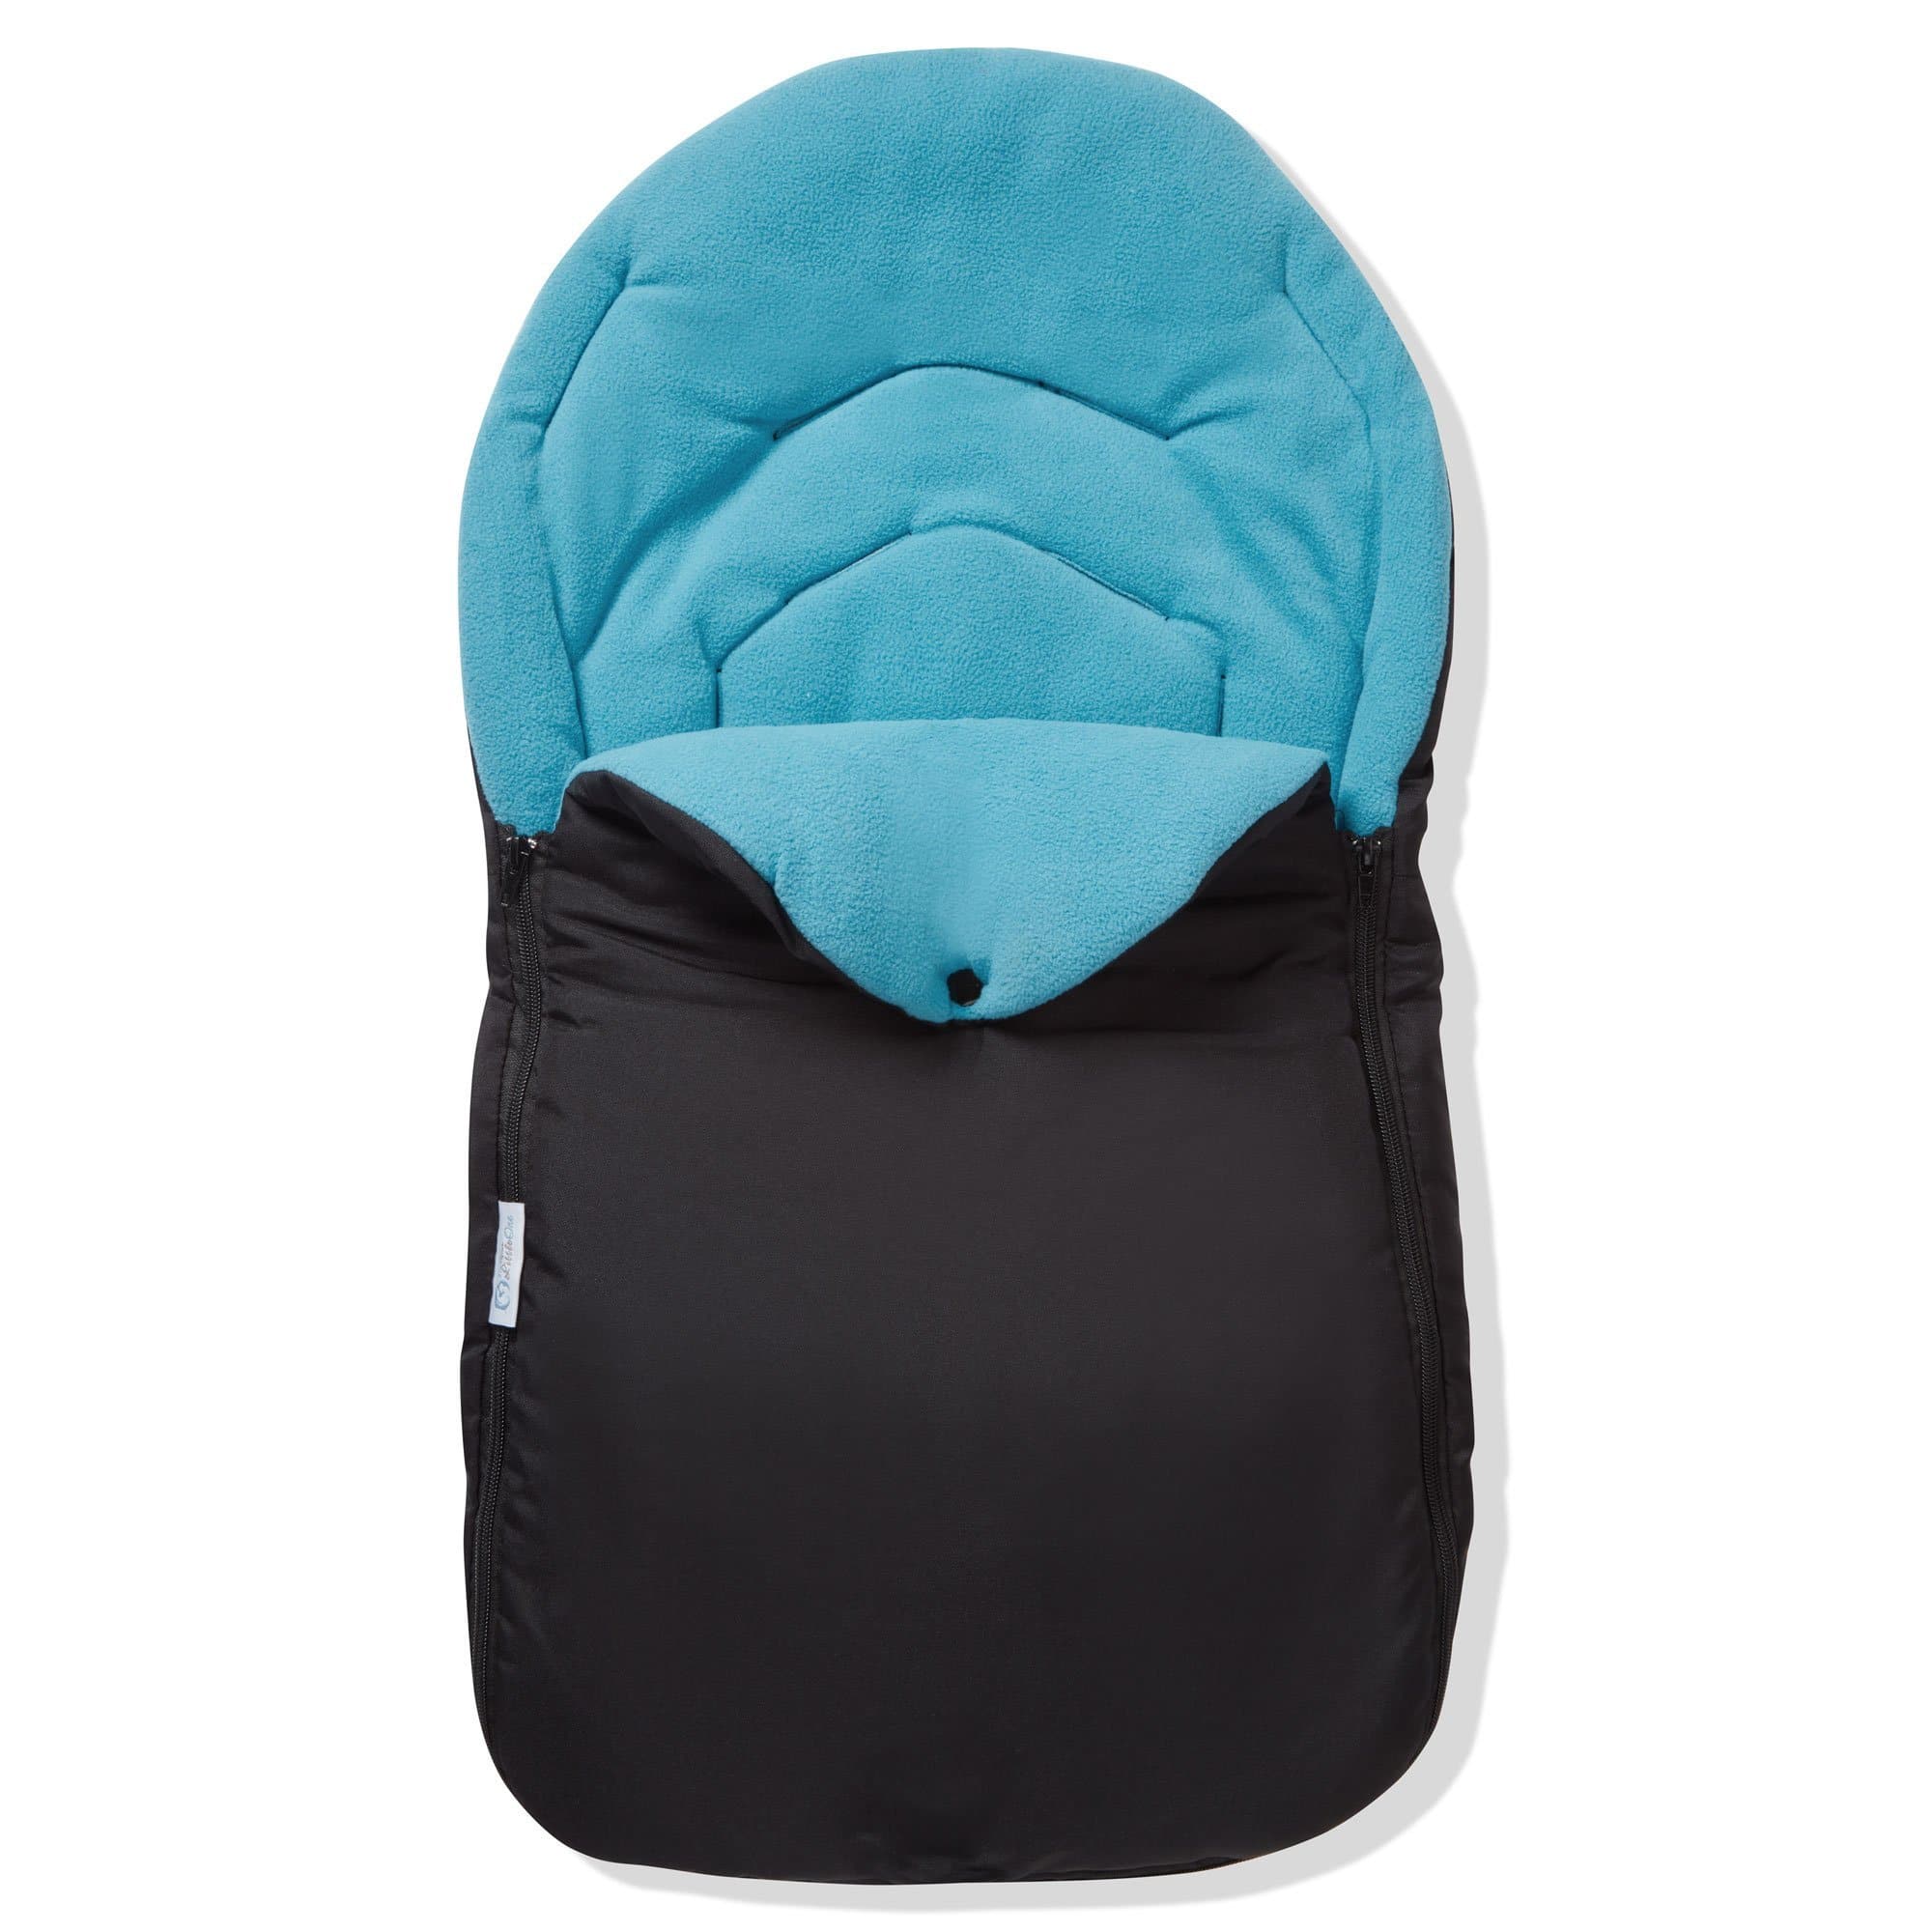 Car Seat Footmuff / Cosy Toes Compatible with Babylo - Turquoise / Fits All Models | For Your Little One